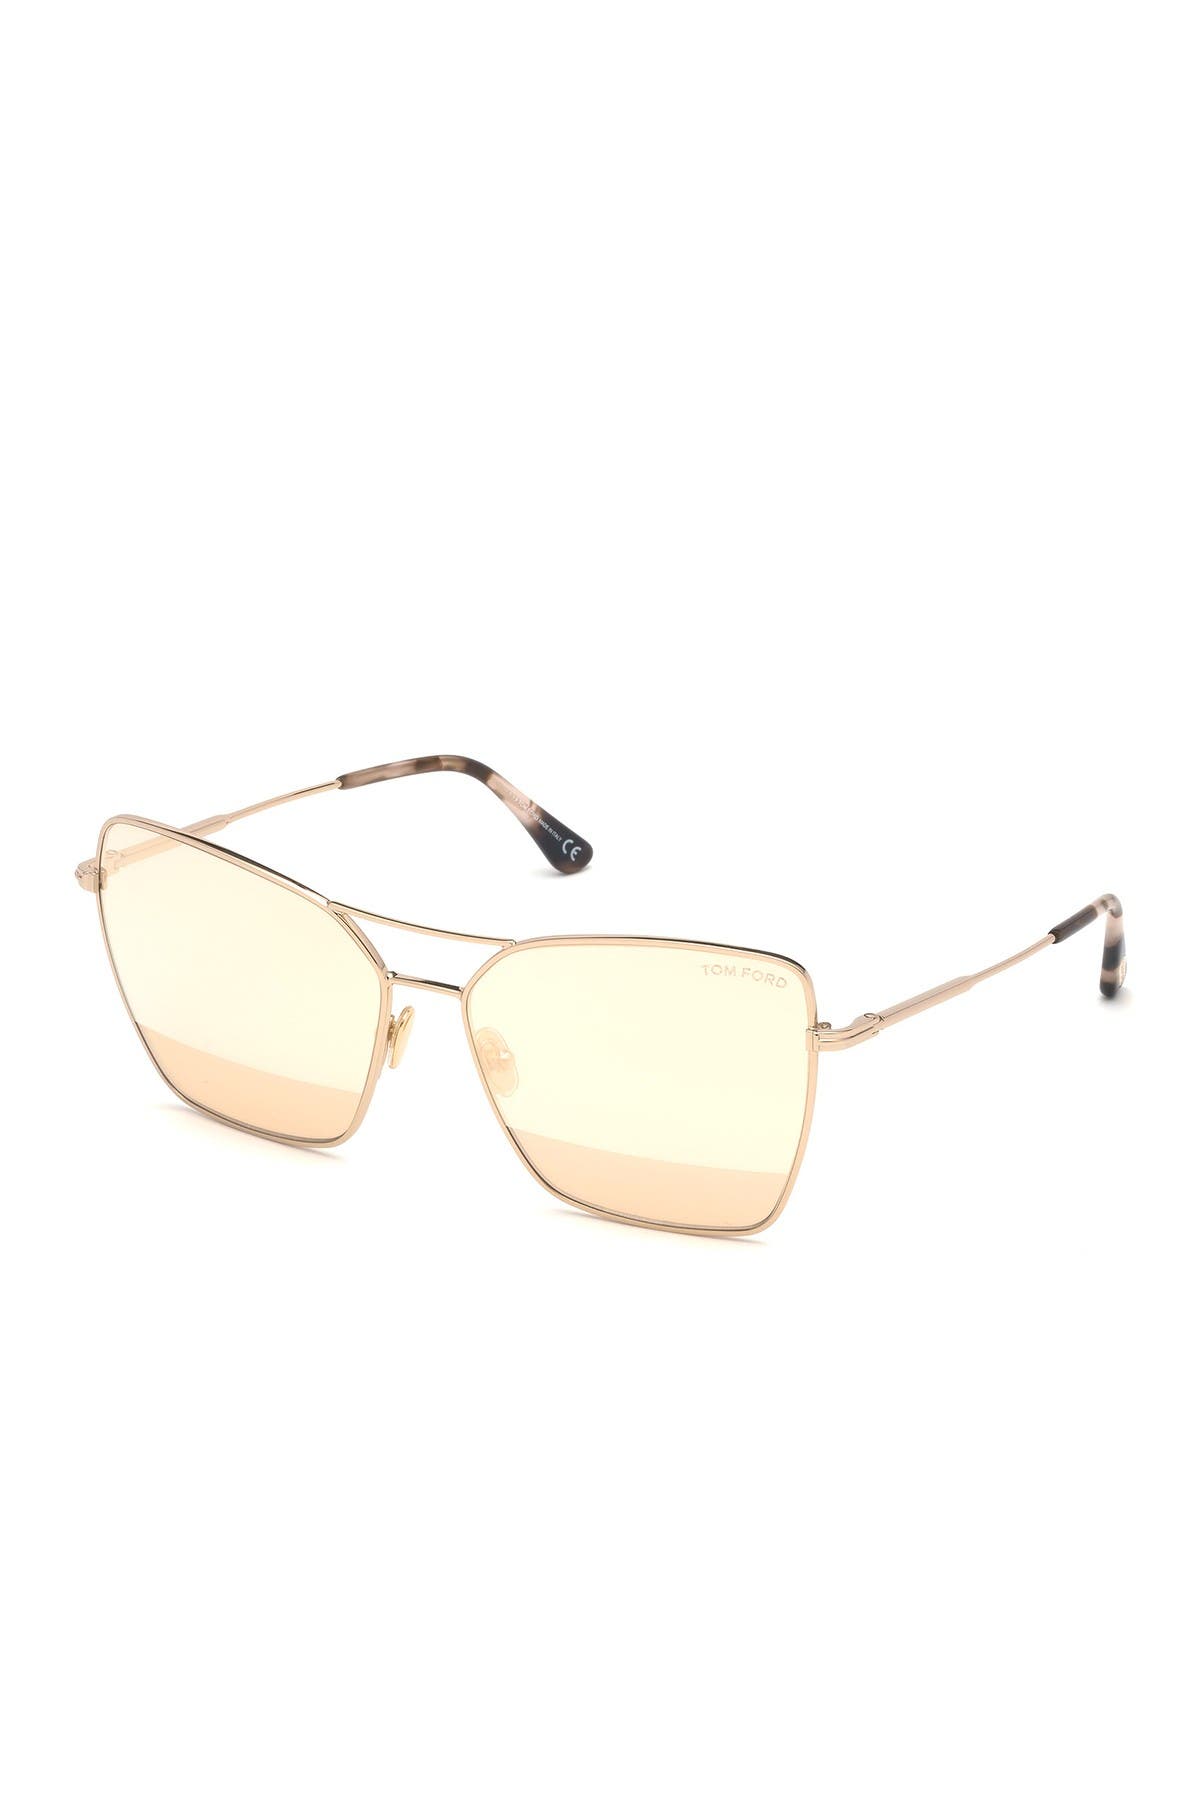 Tom Ford Shiny Rose Gold 61mm Square Aviator Polarized Sunglasses In Gold7